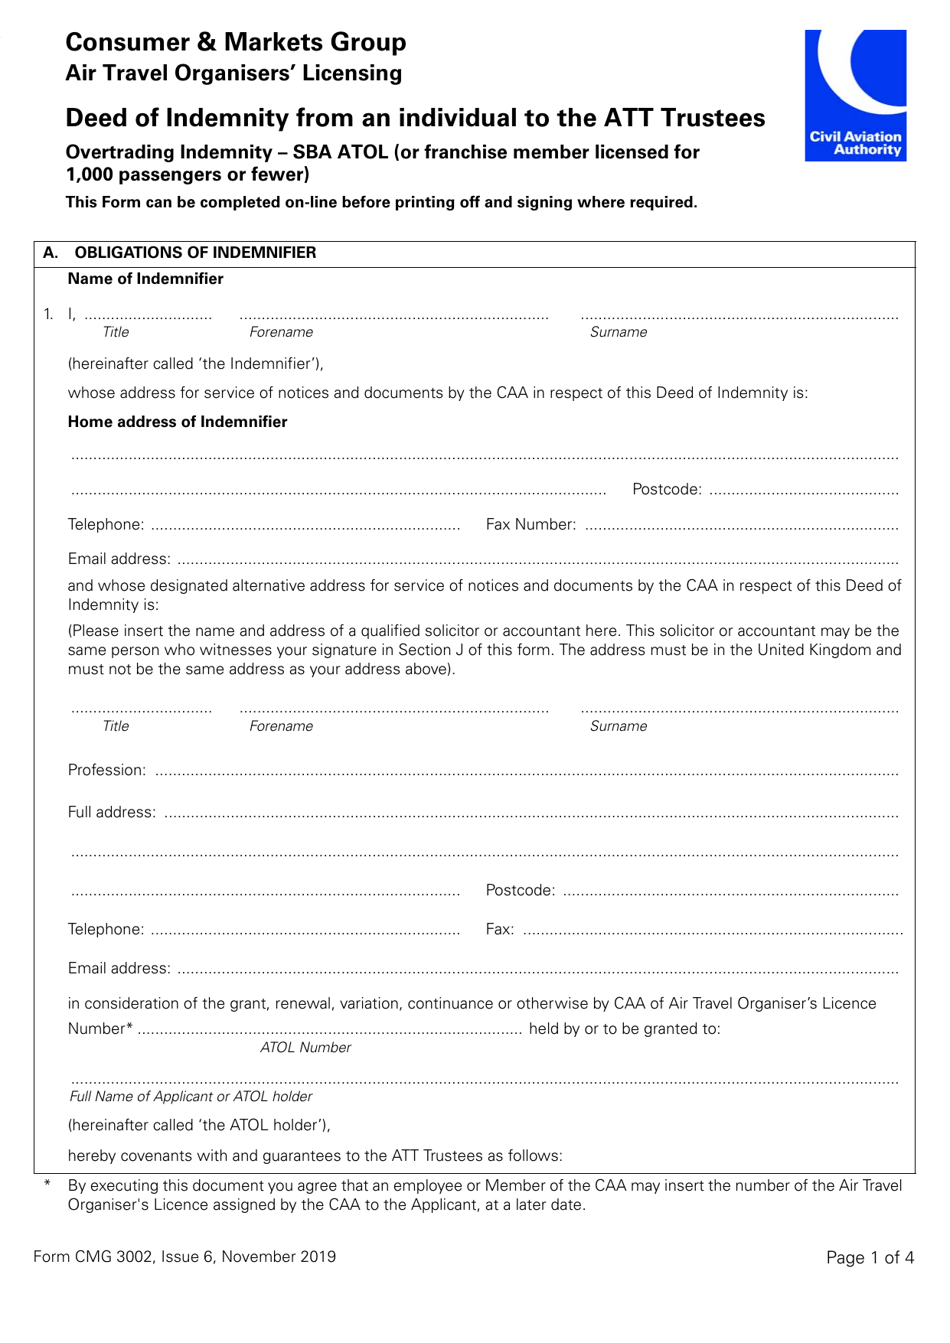 Form CMG3002 Deed of Indemnity From an Individual to the Att Trustees Overtrading Indemnity - SBA Atol (Or Franchise Member Licensed for 1,000 Passengers or Fewer) - United Kingdom, Page 1